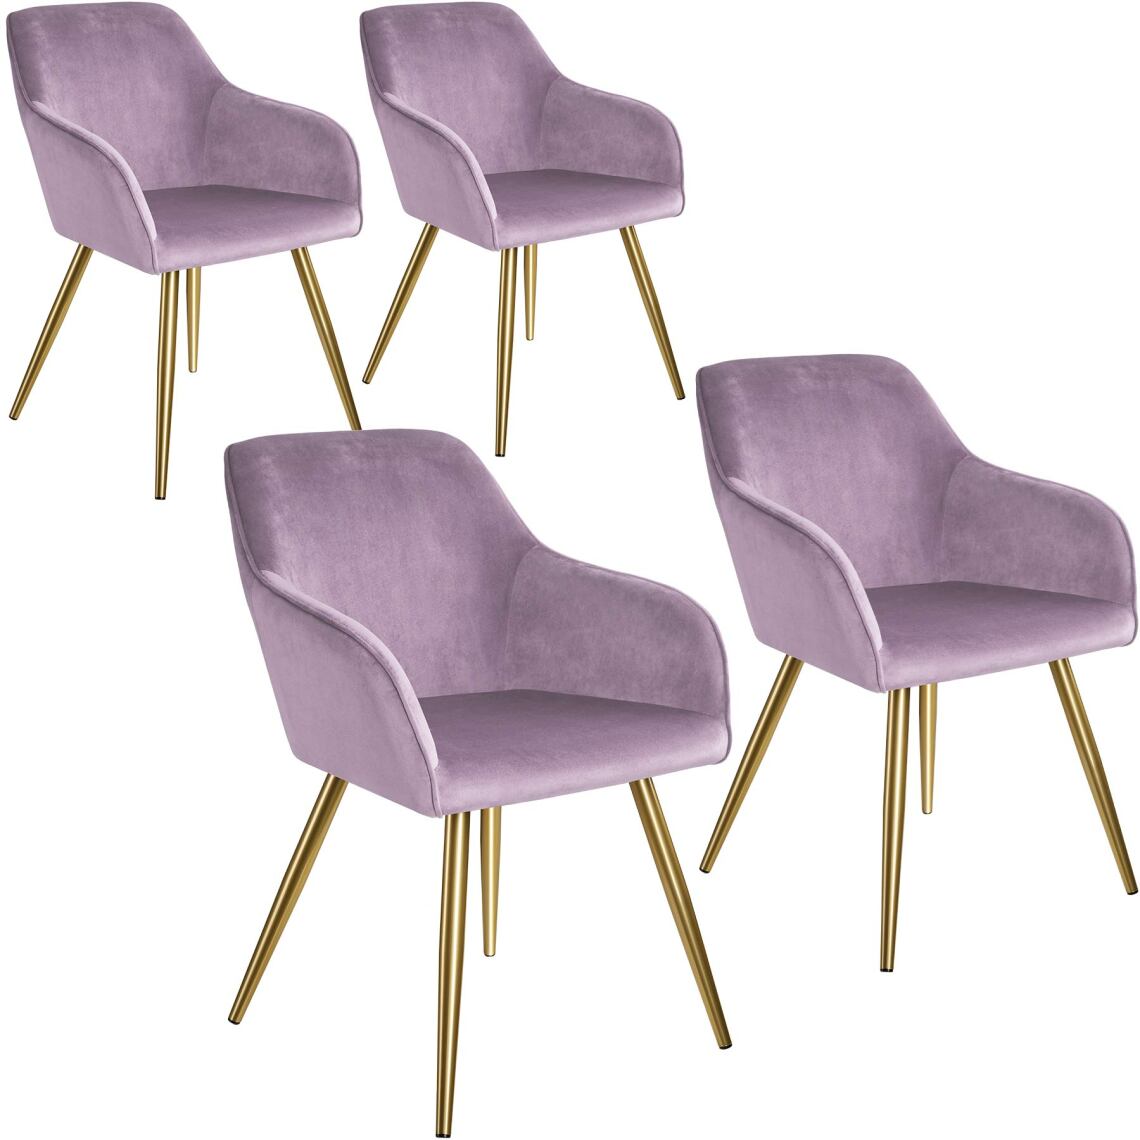 Tectake - 4 Chaises MARILYN Effet Velours Style Scandinave - violet clair/or - Chaises